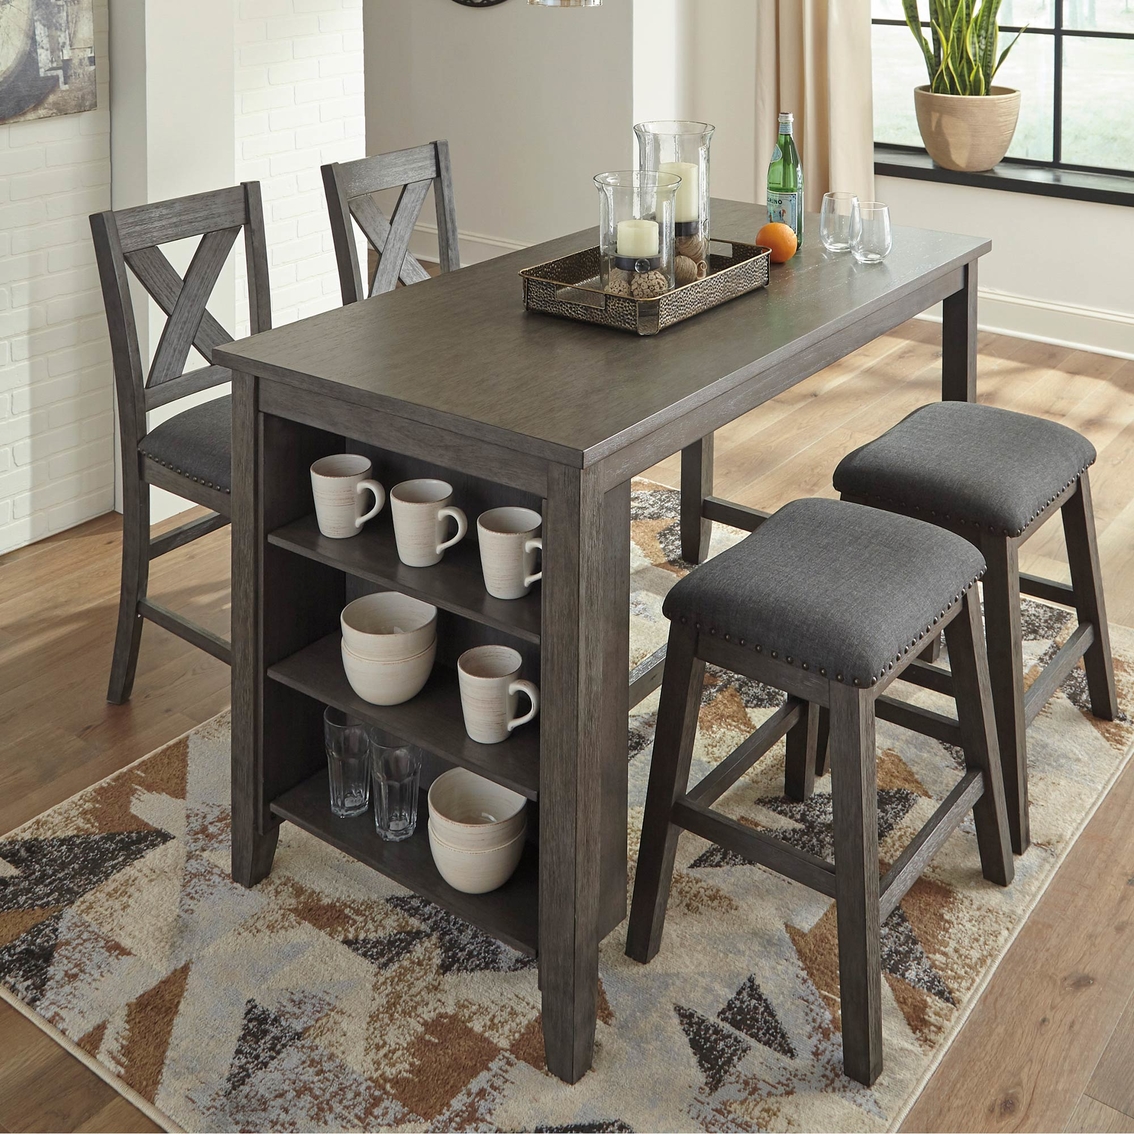 Signature Design by Ashley Caitbrook Counter Table 5 pc. Set - Image 2 of 4